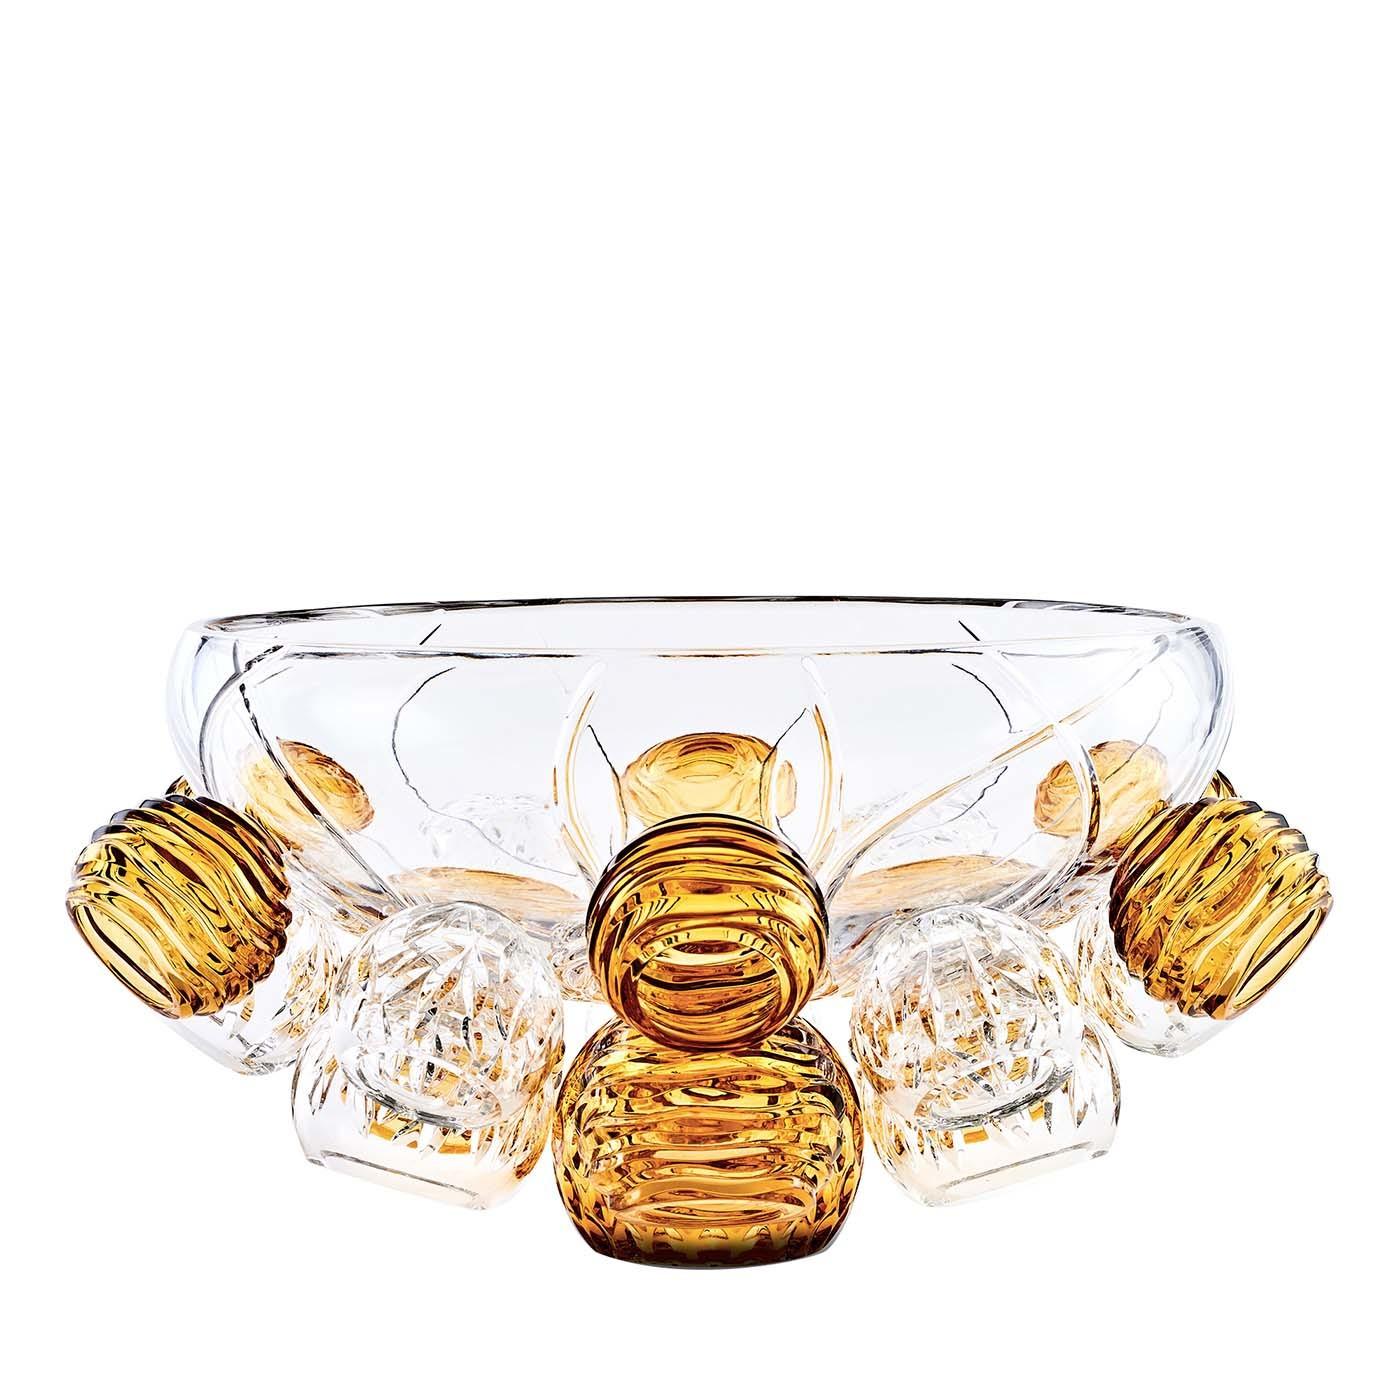 The original design of this unique bowl, its exquisite craftsmanship, and the use of fine crystal create a stunning object of functional decor that will not go unnoticed. Particularly suitable for a modern home, this bowl can be displayed as a large